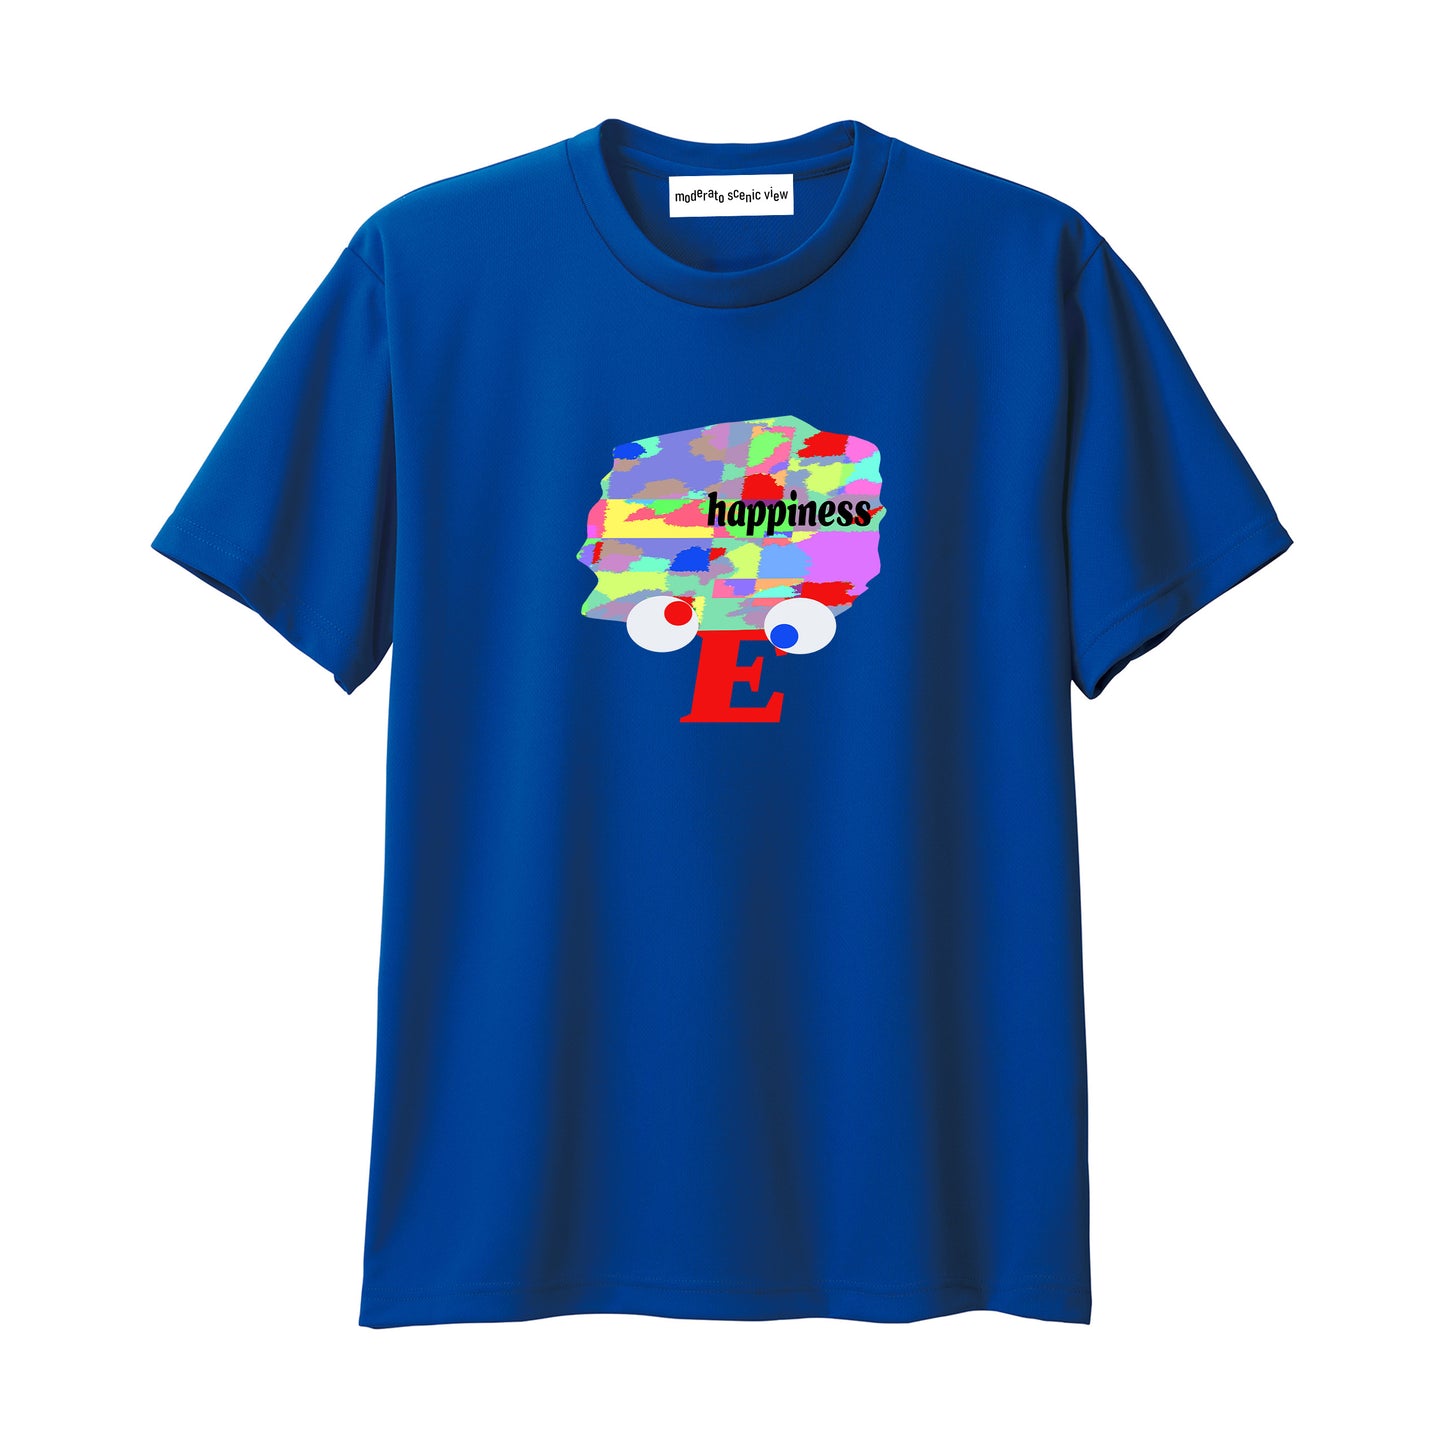 [moderato scenic view] T-shirts [Brain on the happiness]